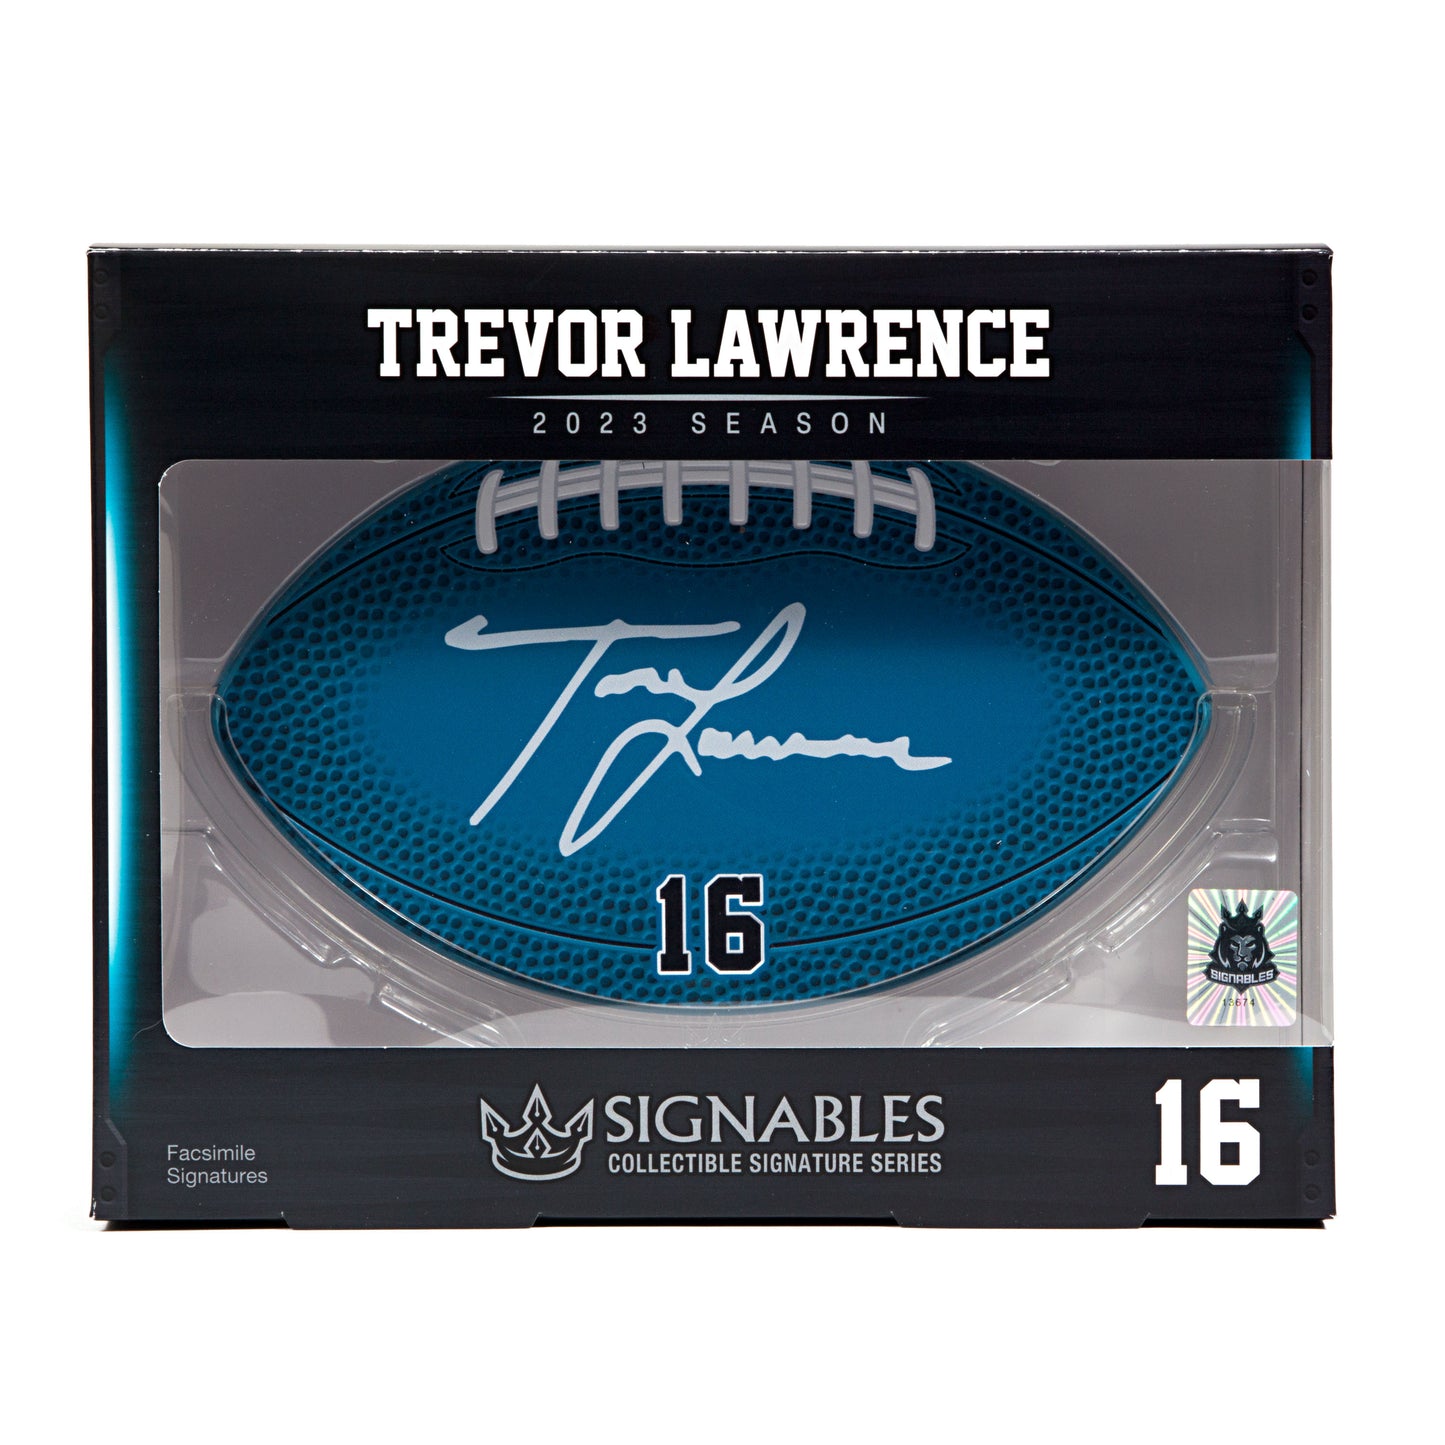 Trevor Lawrence  - NFLPA 2023 Signables Collectible